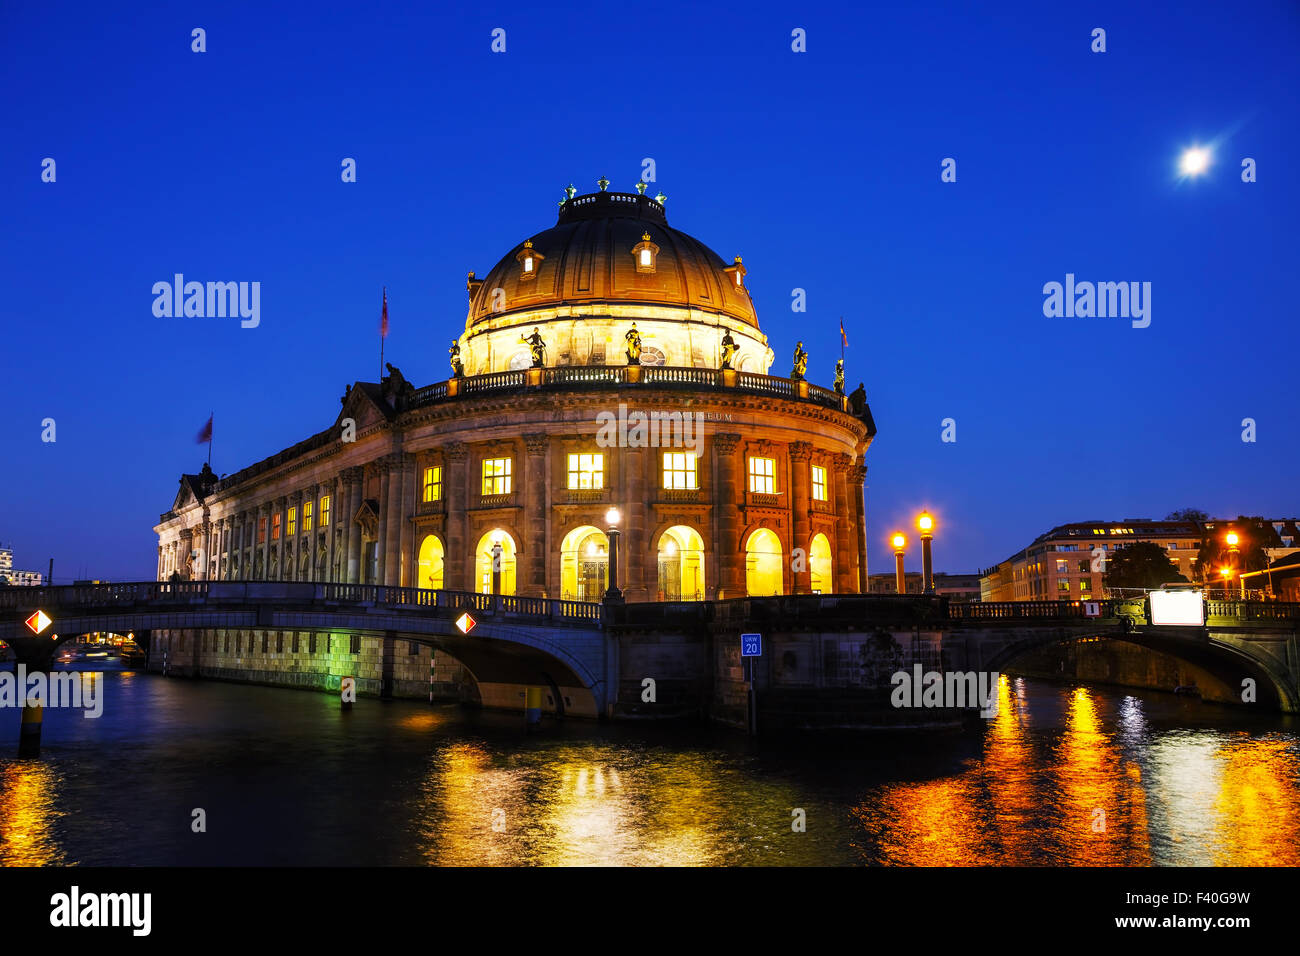 Bode museum in Berlin at night Stock Photo